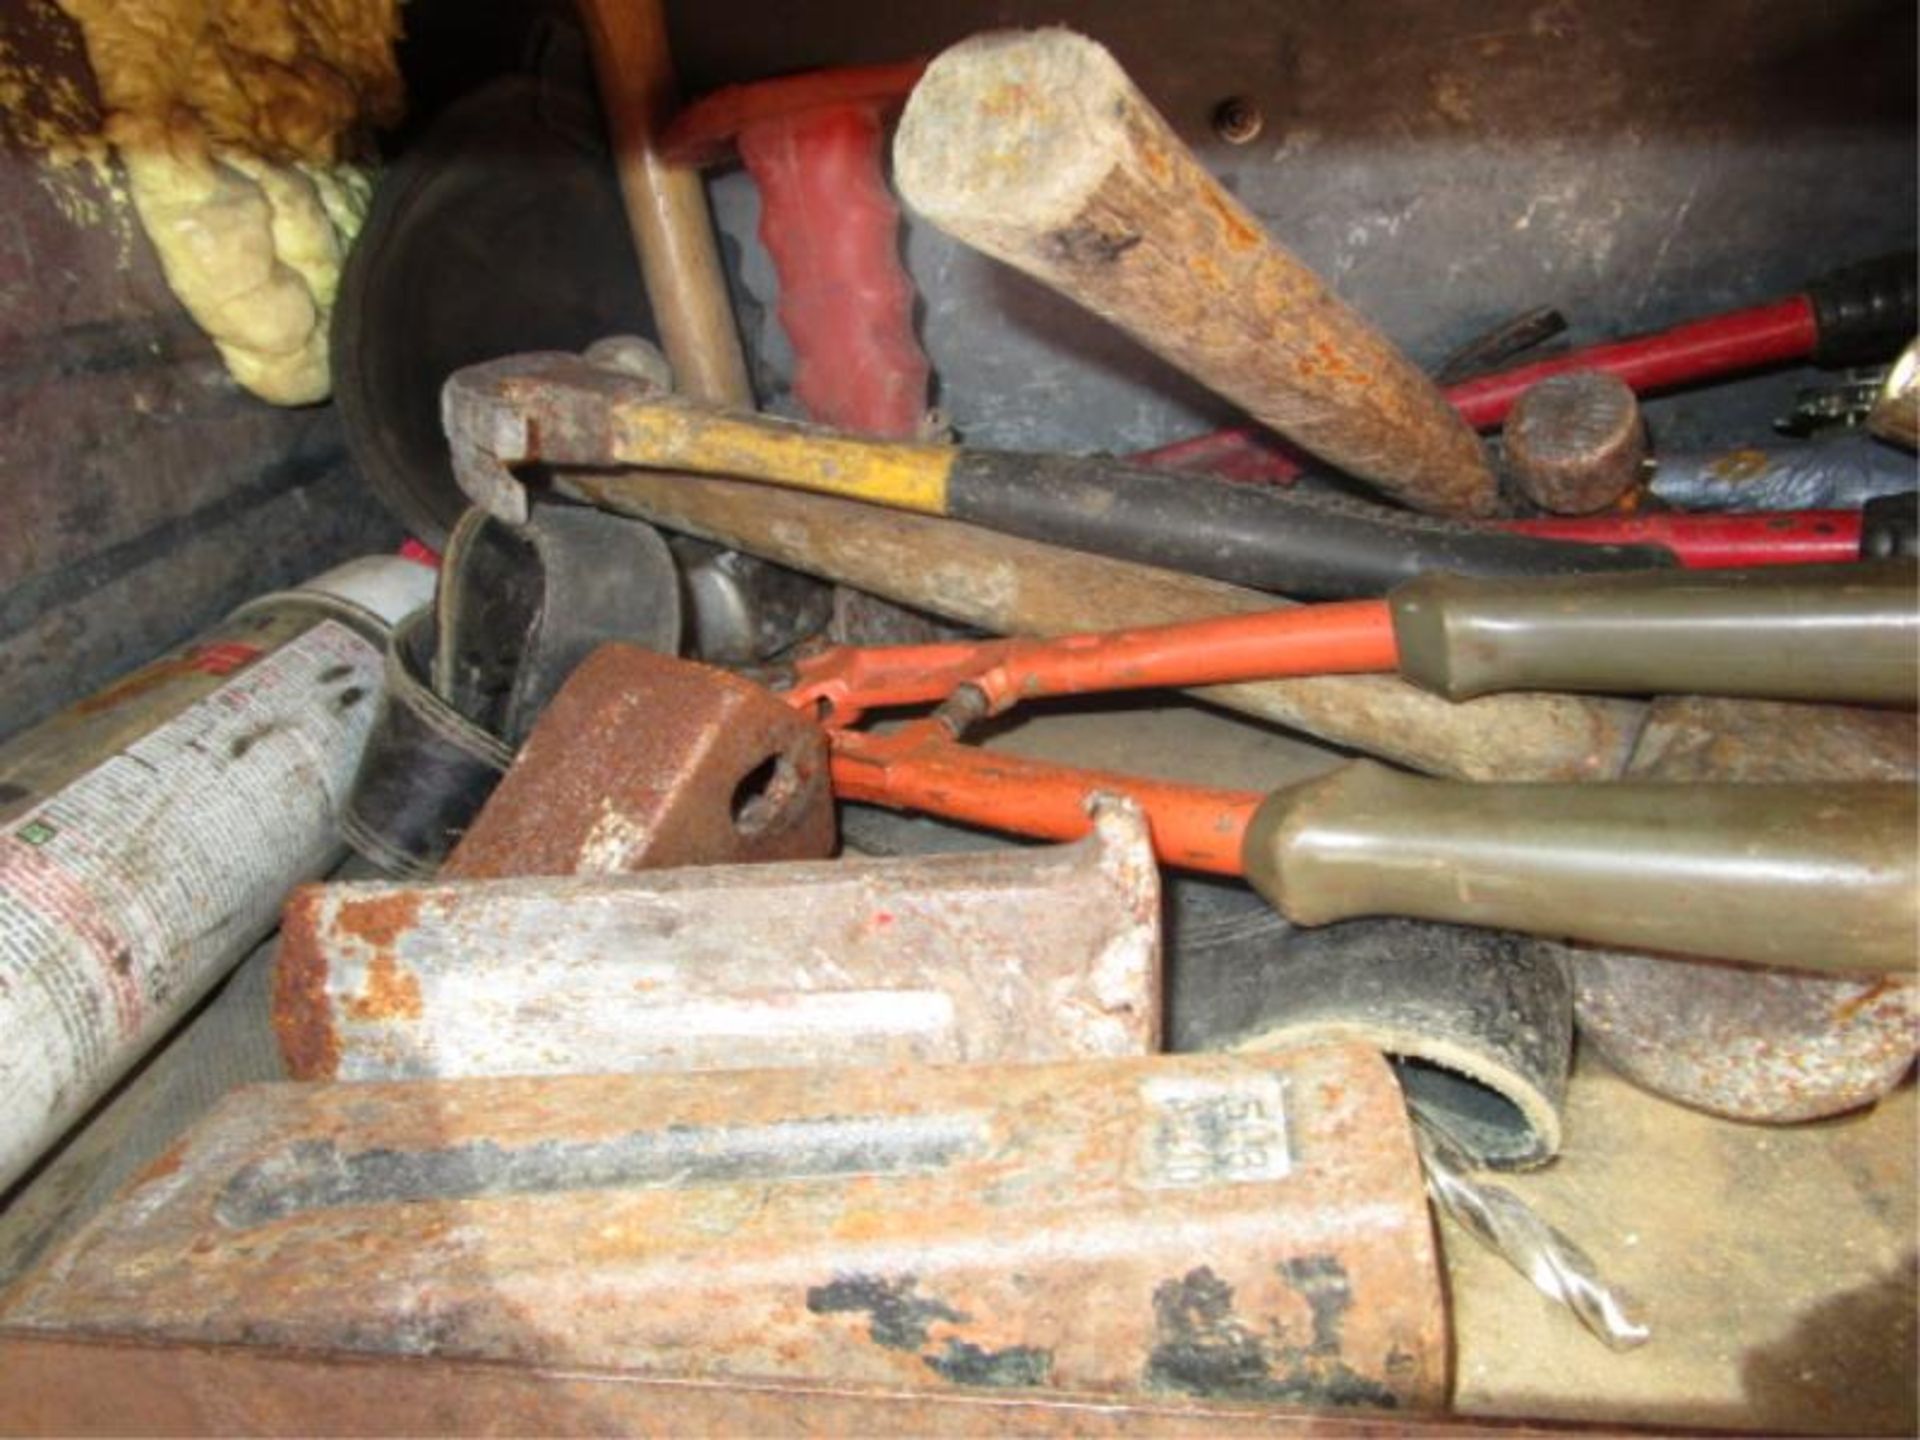 Top Shelf Lot - Asst. Hammers, Pipe Wrenches, Tie Down, Wedges, Jumper Cables - Image 3 of 5